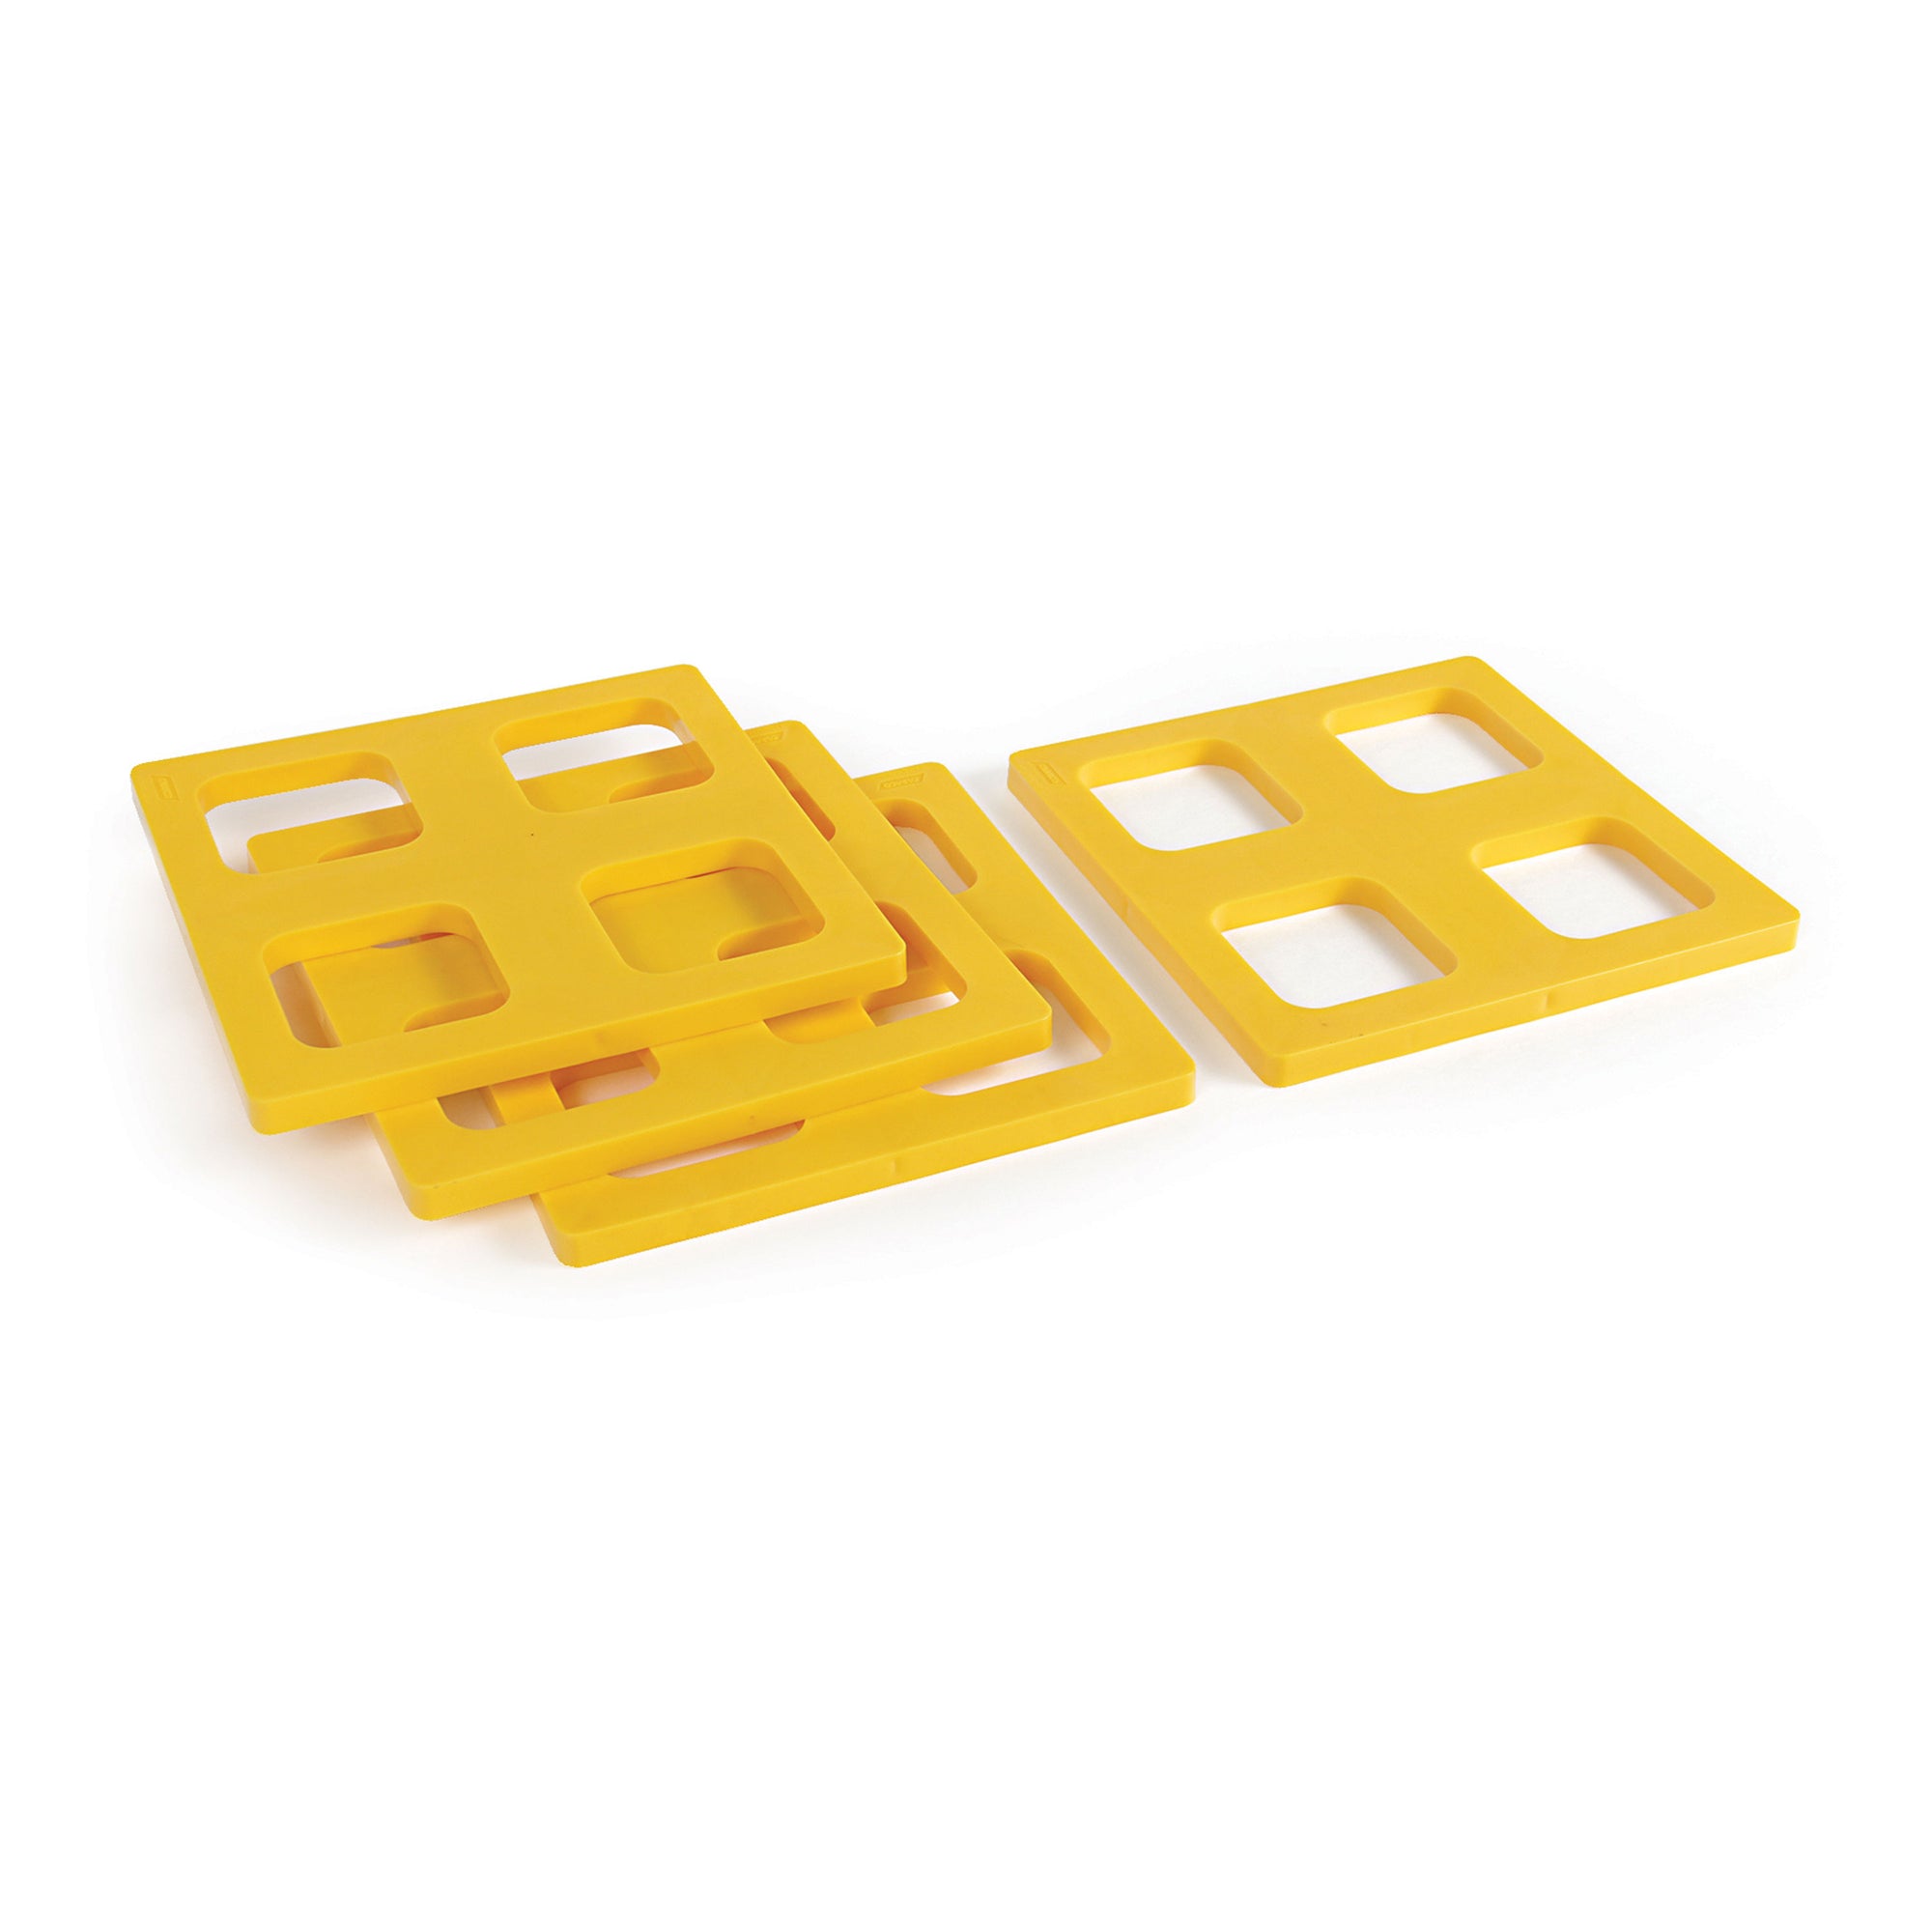 Camco 44500 Leveling Block Caps - 4 Pack